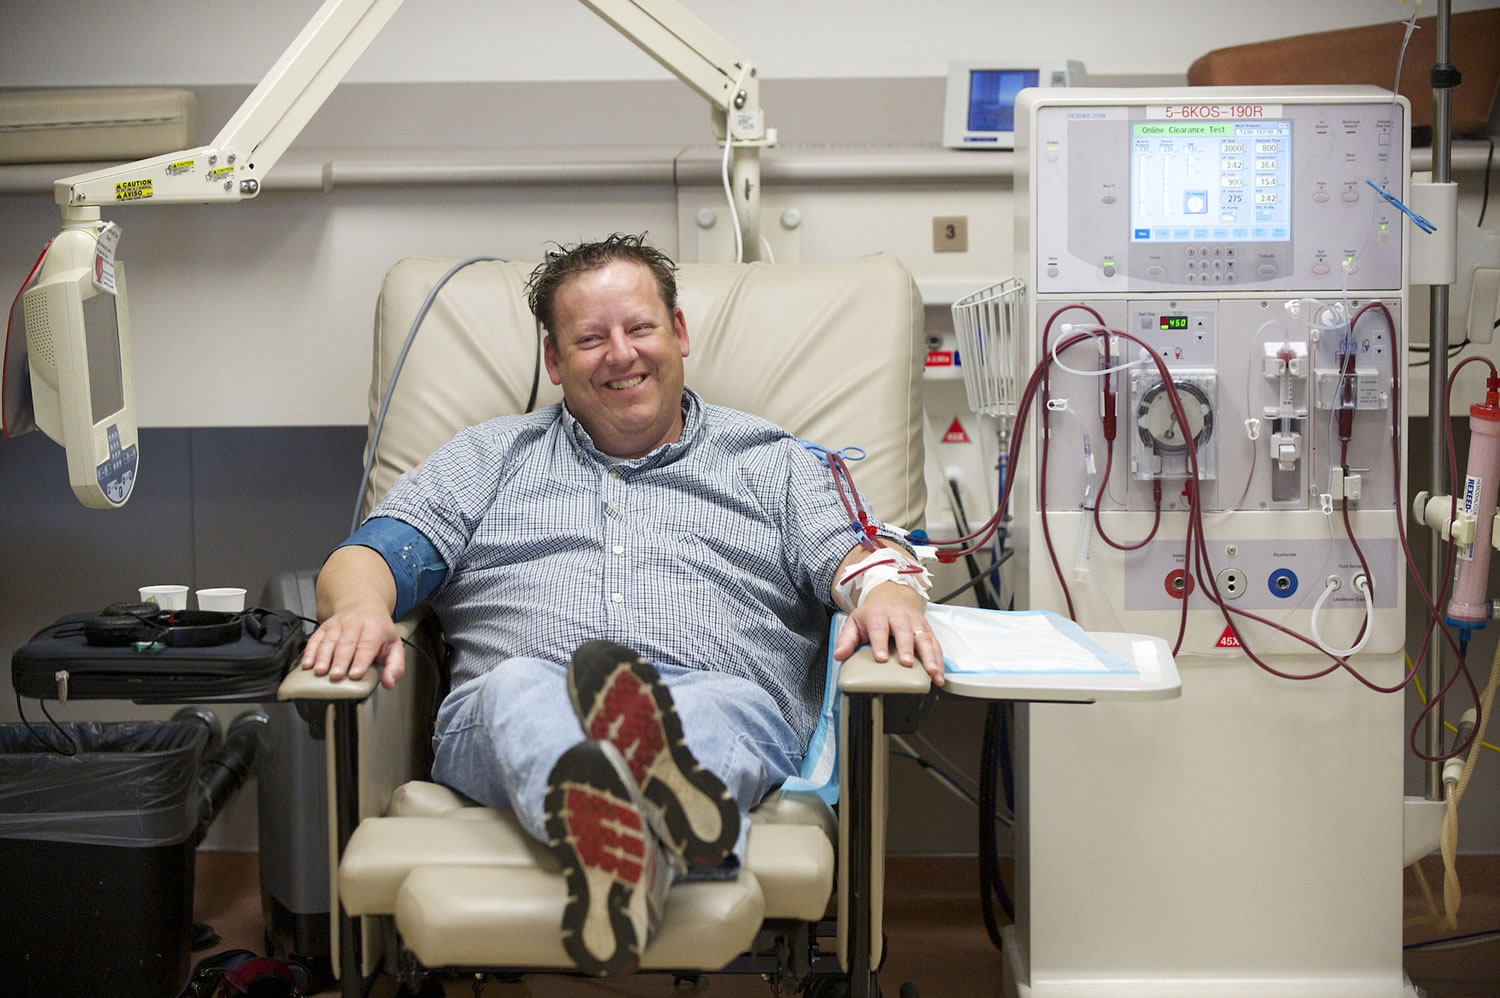 Scott Warren of Vancouver undergoes dialysis at DaVita Vancouver Dialysis Center three days per week for four hours each session.